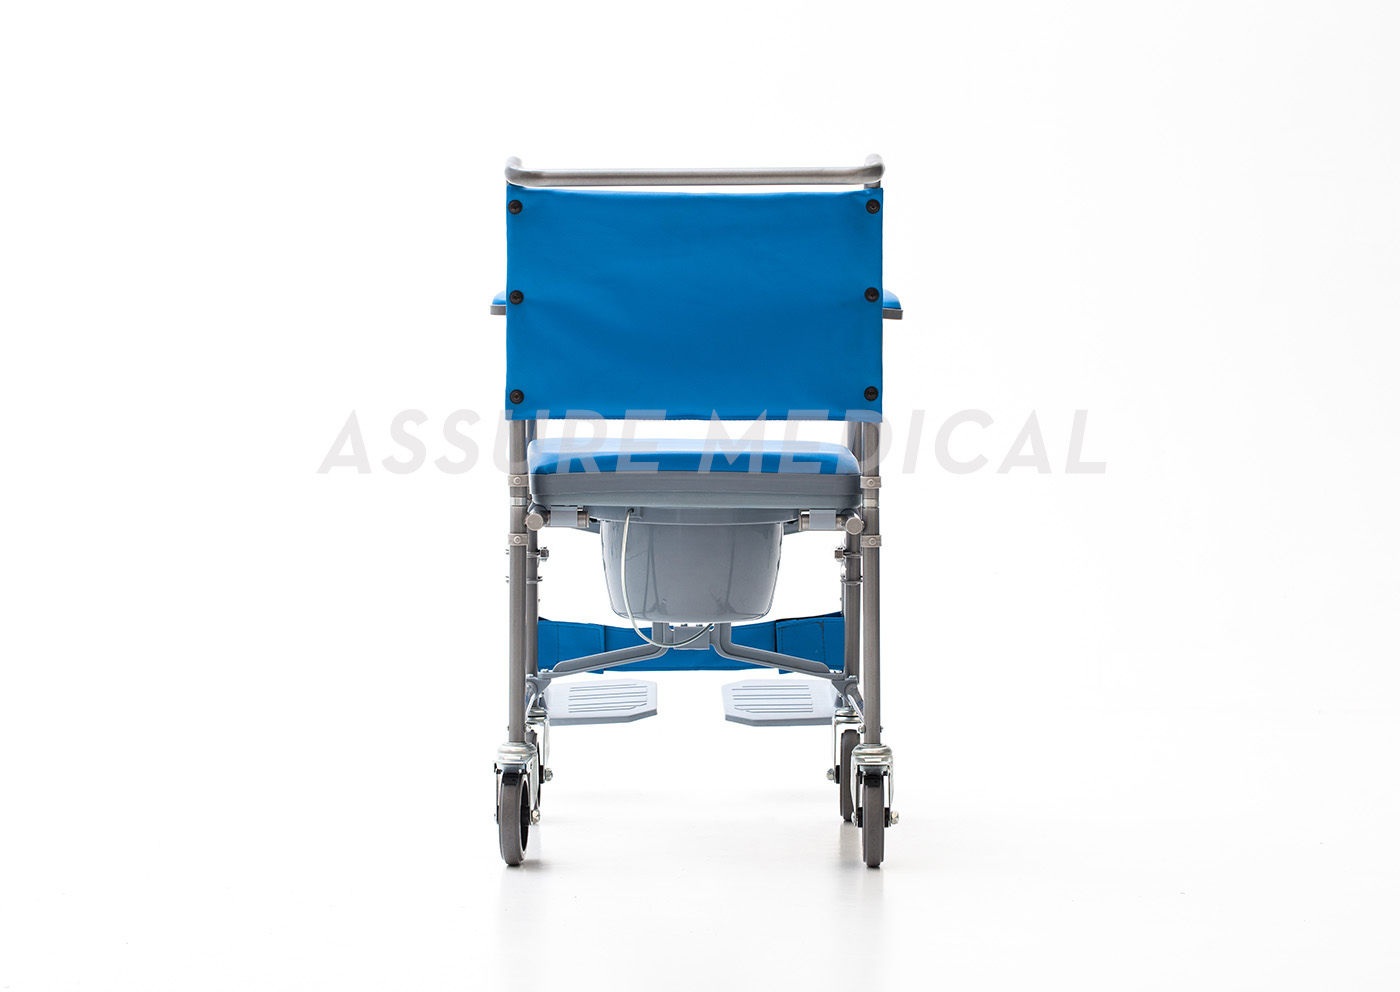 YJ-7100C Commode Chair, Blue seat and back, Foldable 